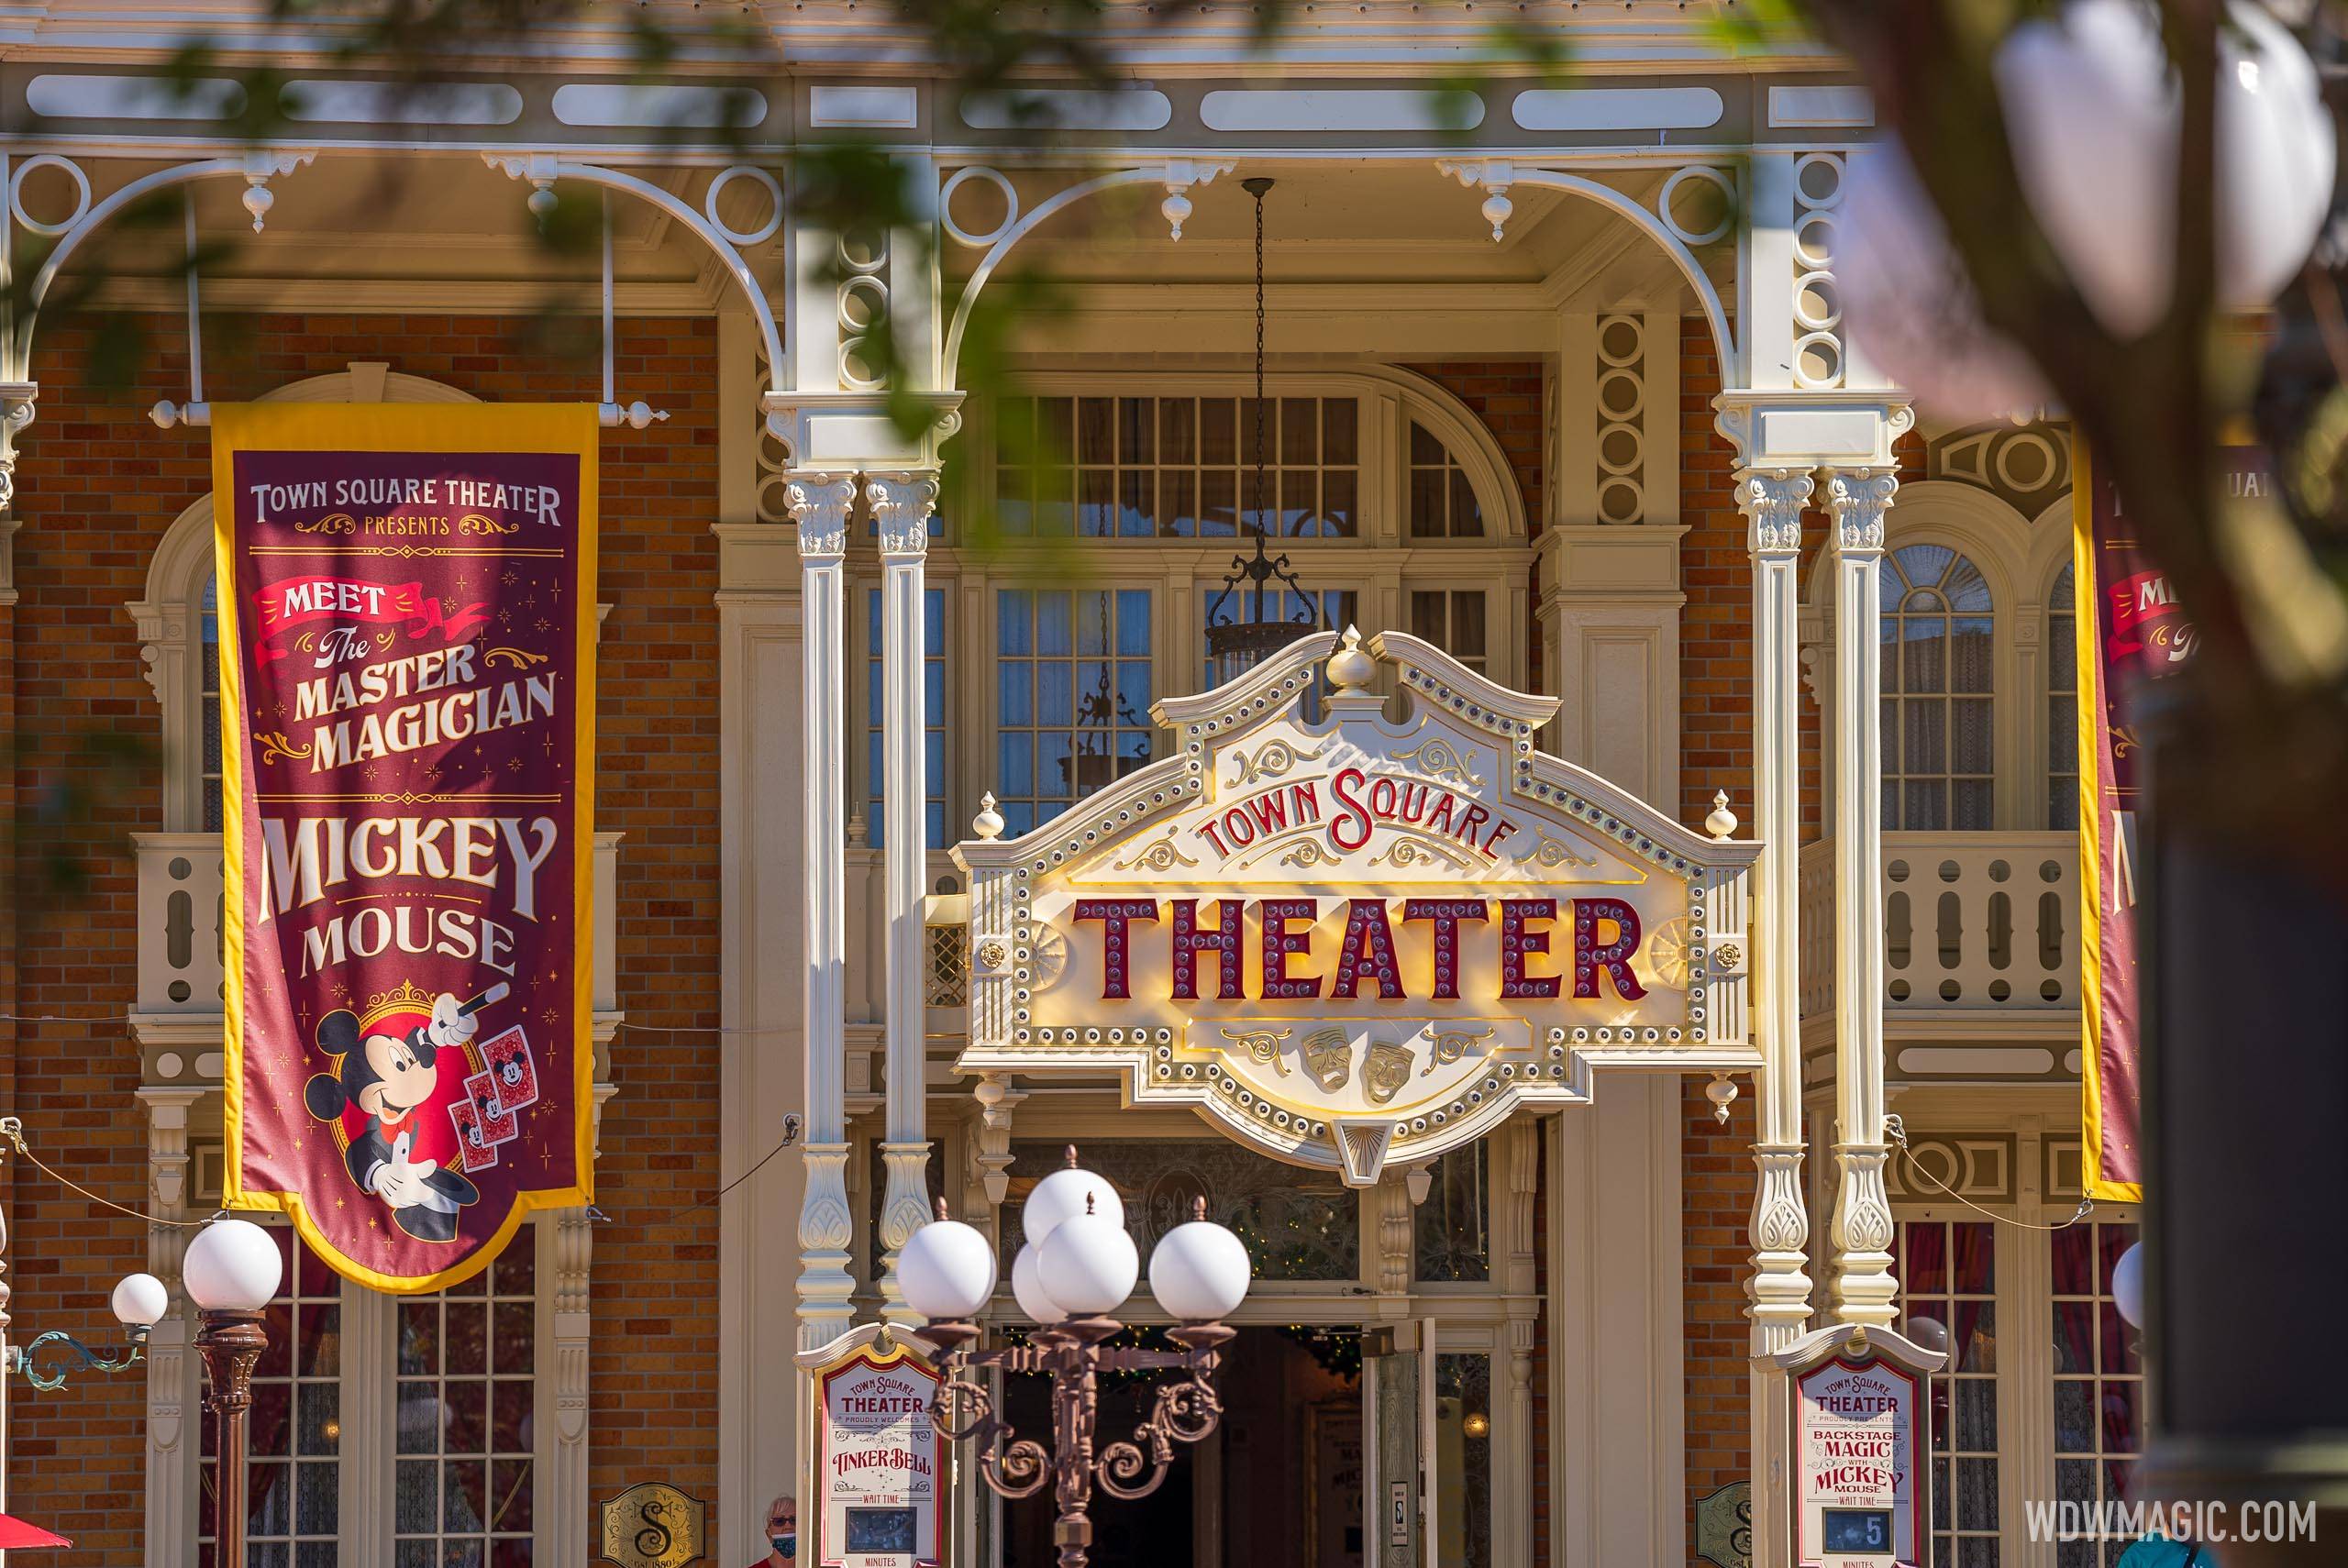 Minnie Mouse will be leaving Town Square Theater